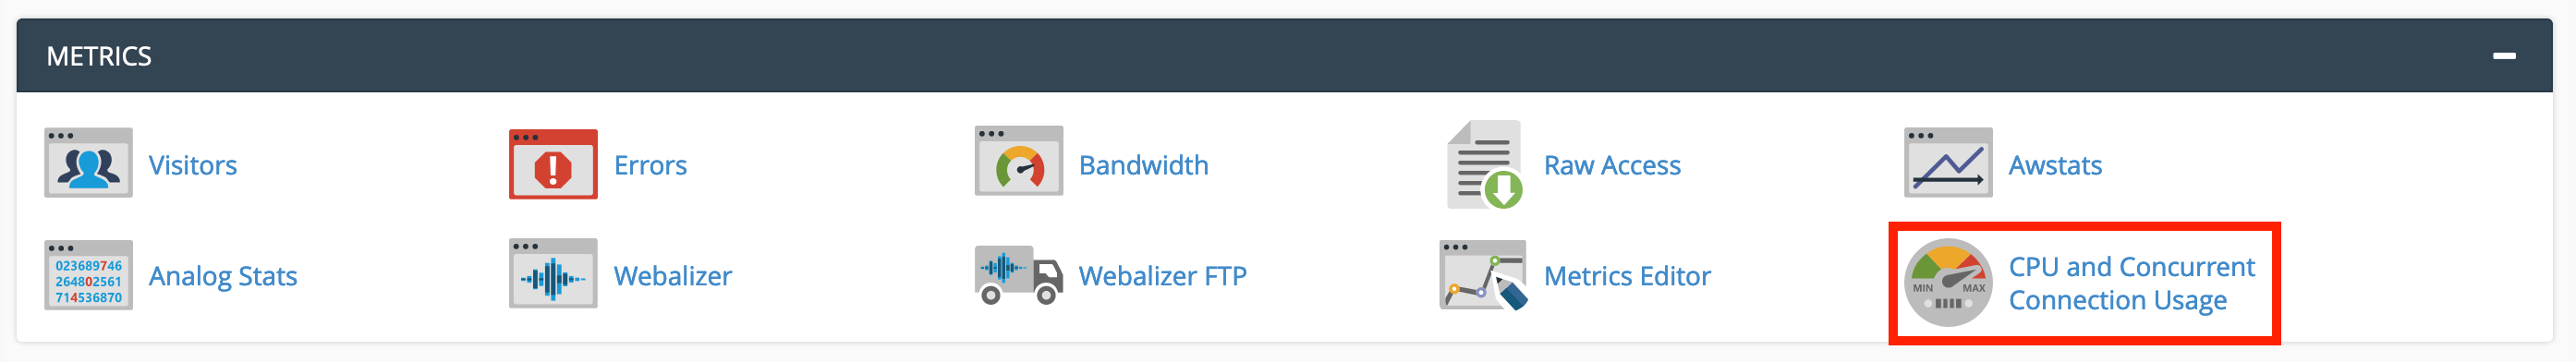 cpanel-cpu.png